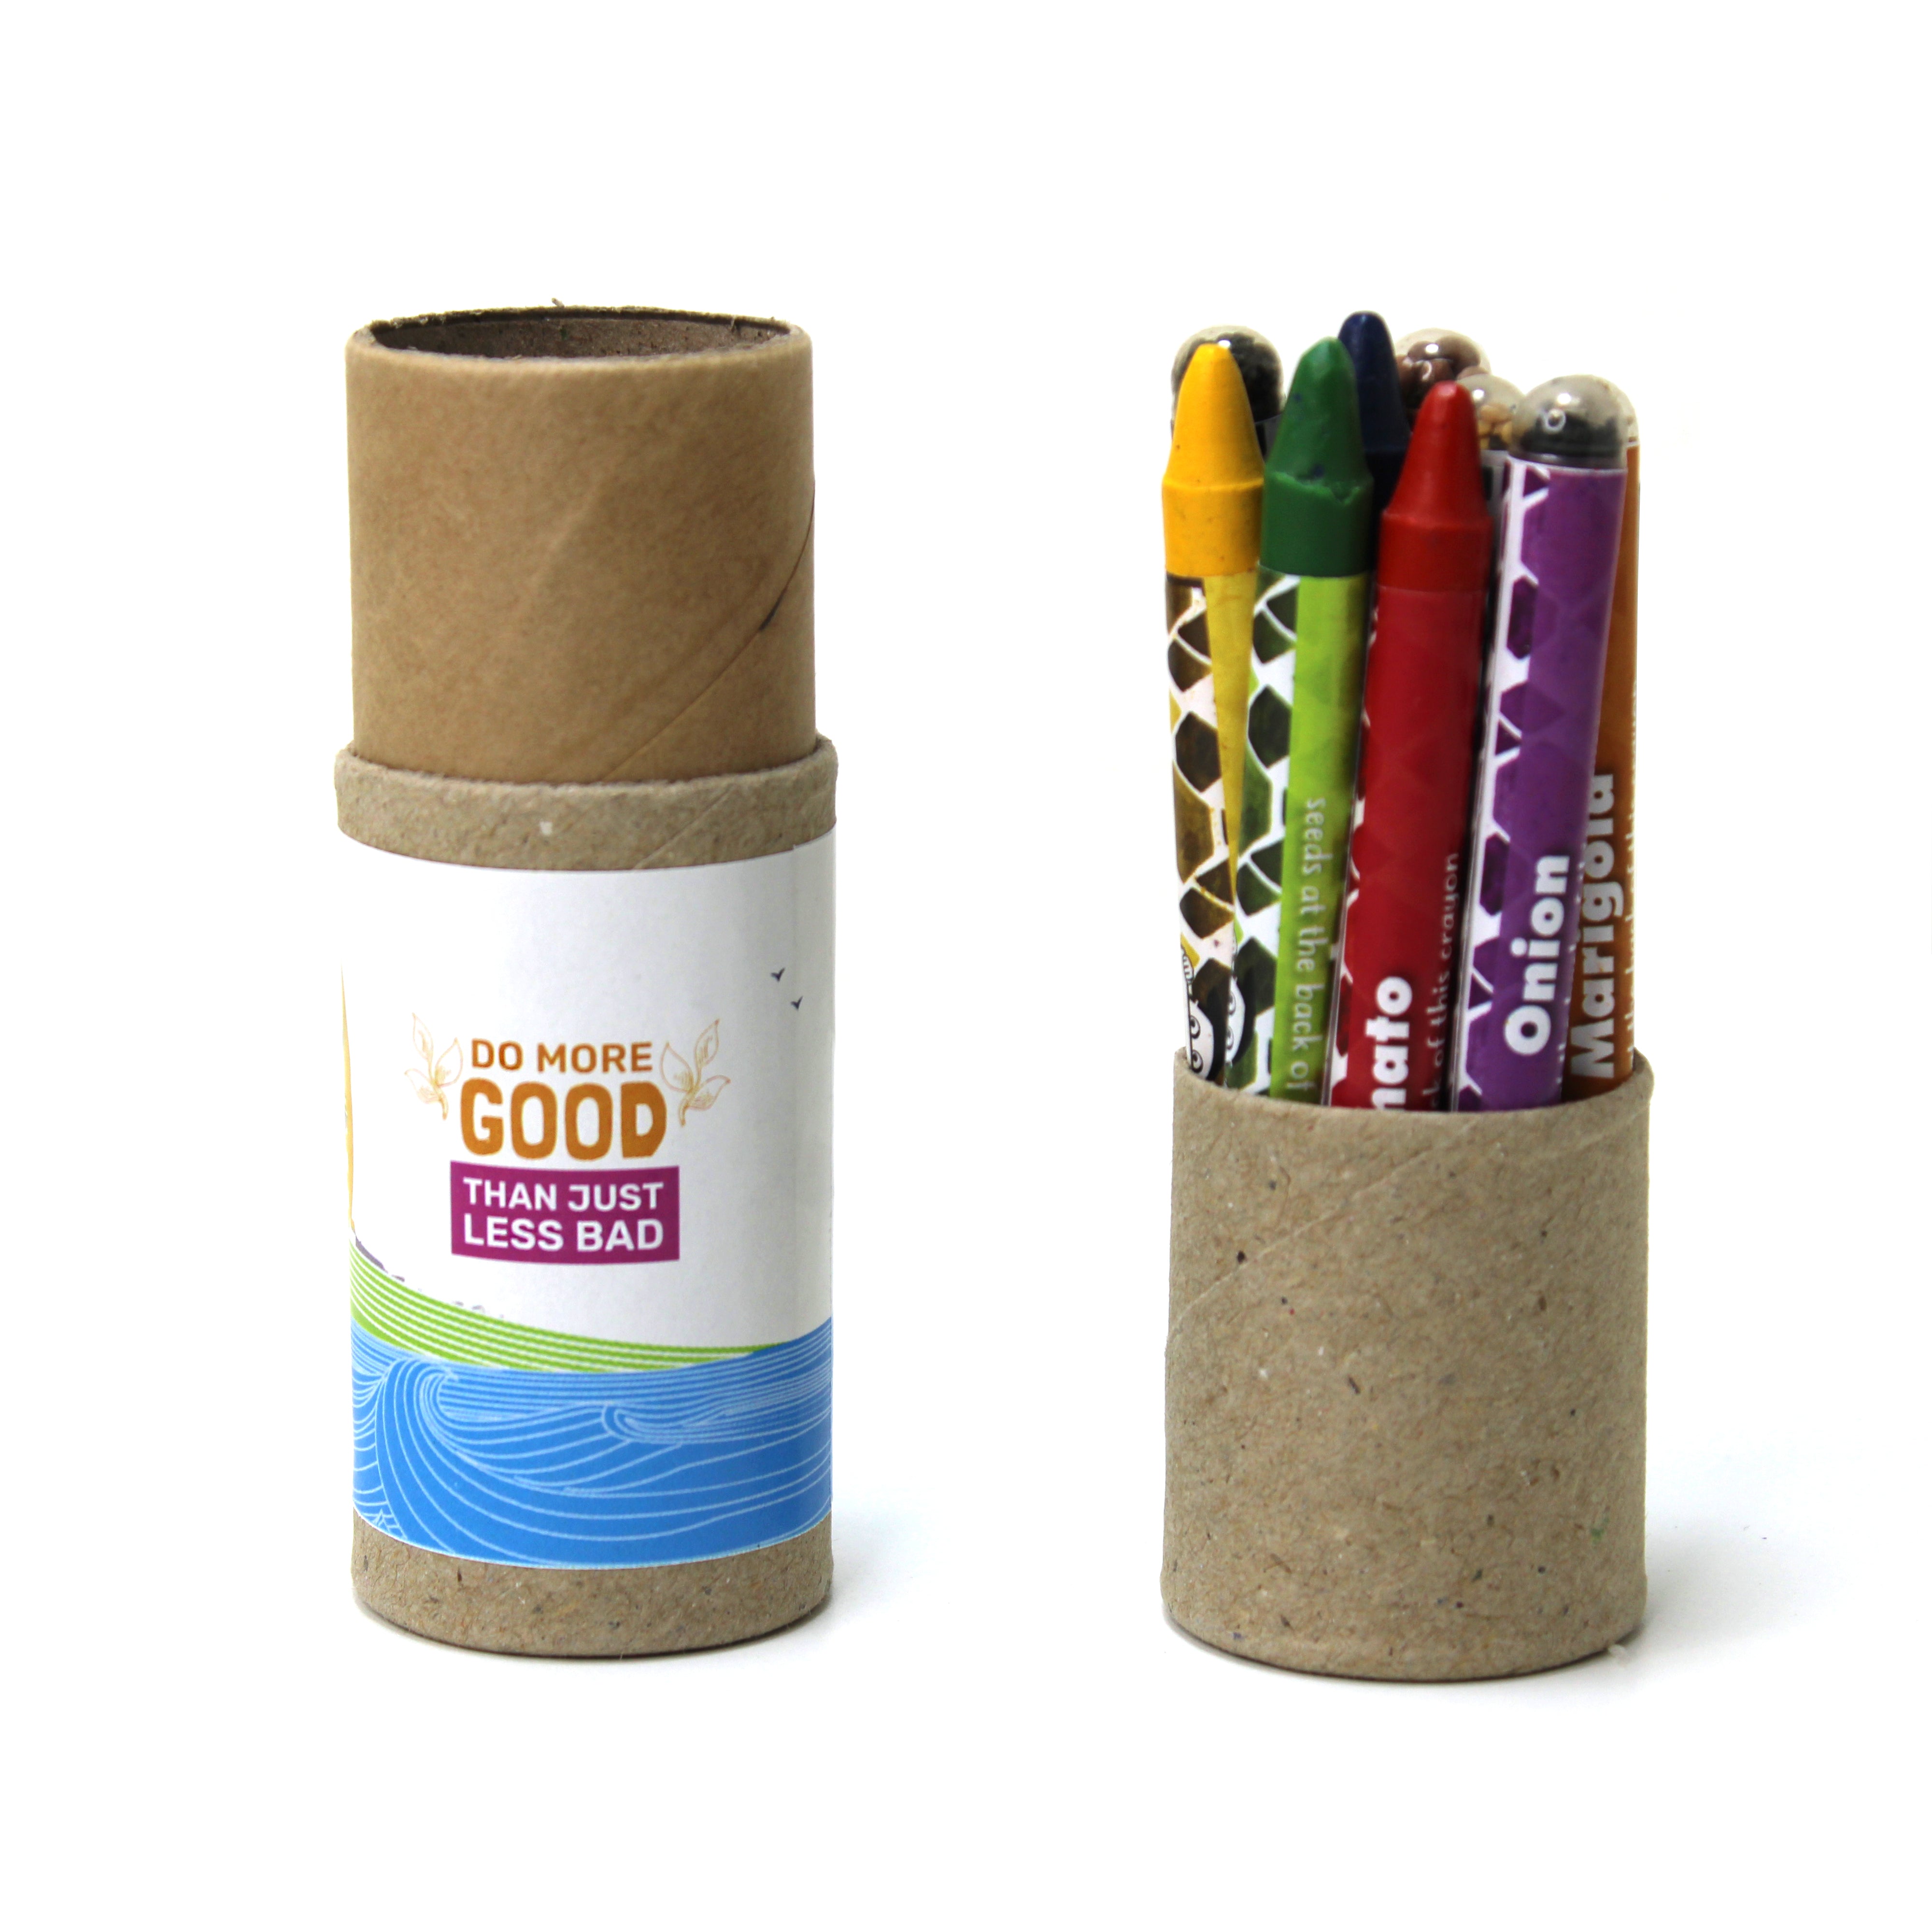 Recycled paper seed crayons & color pencils